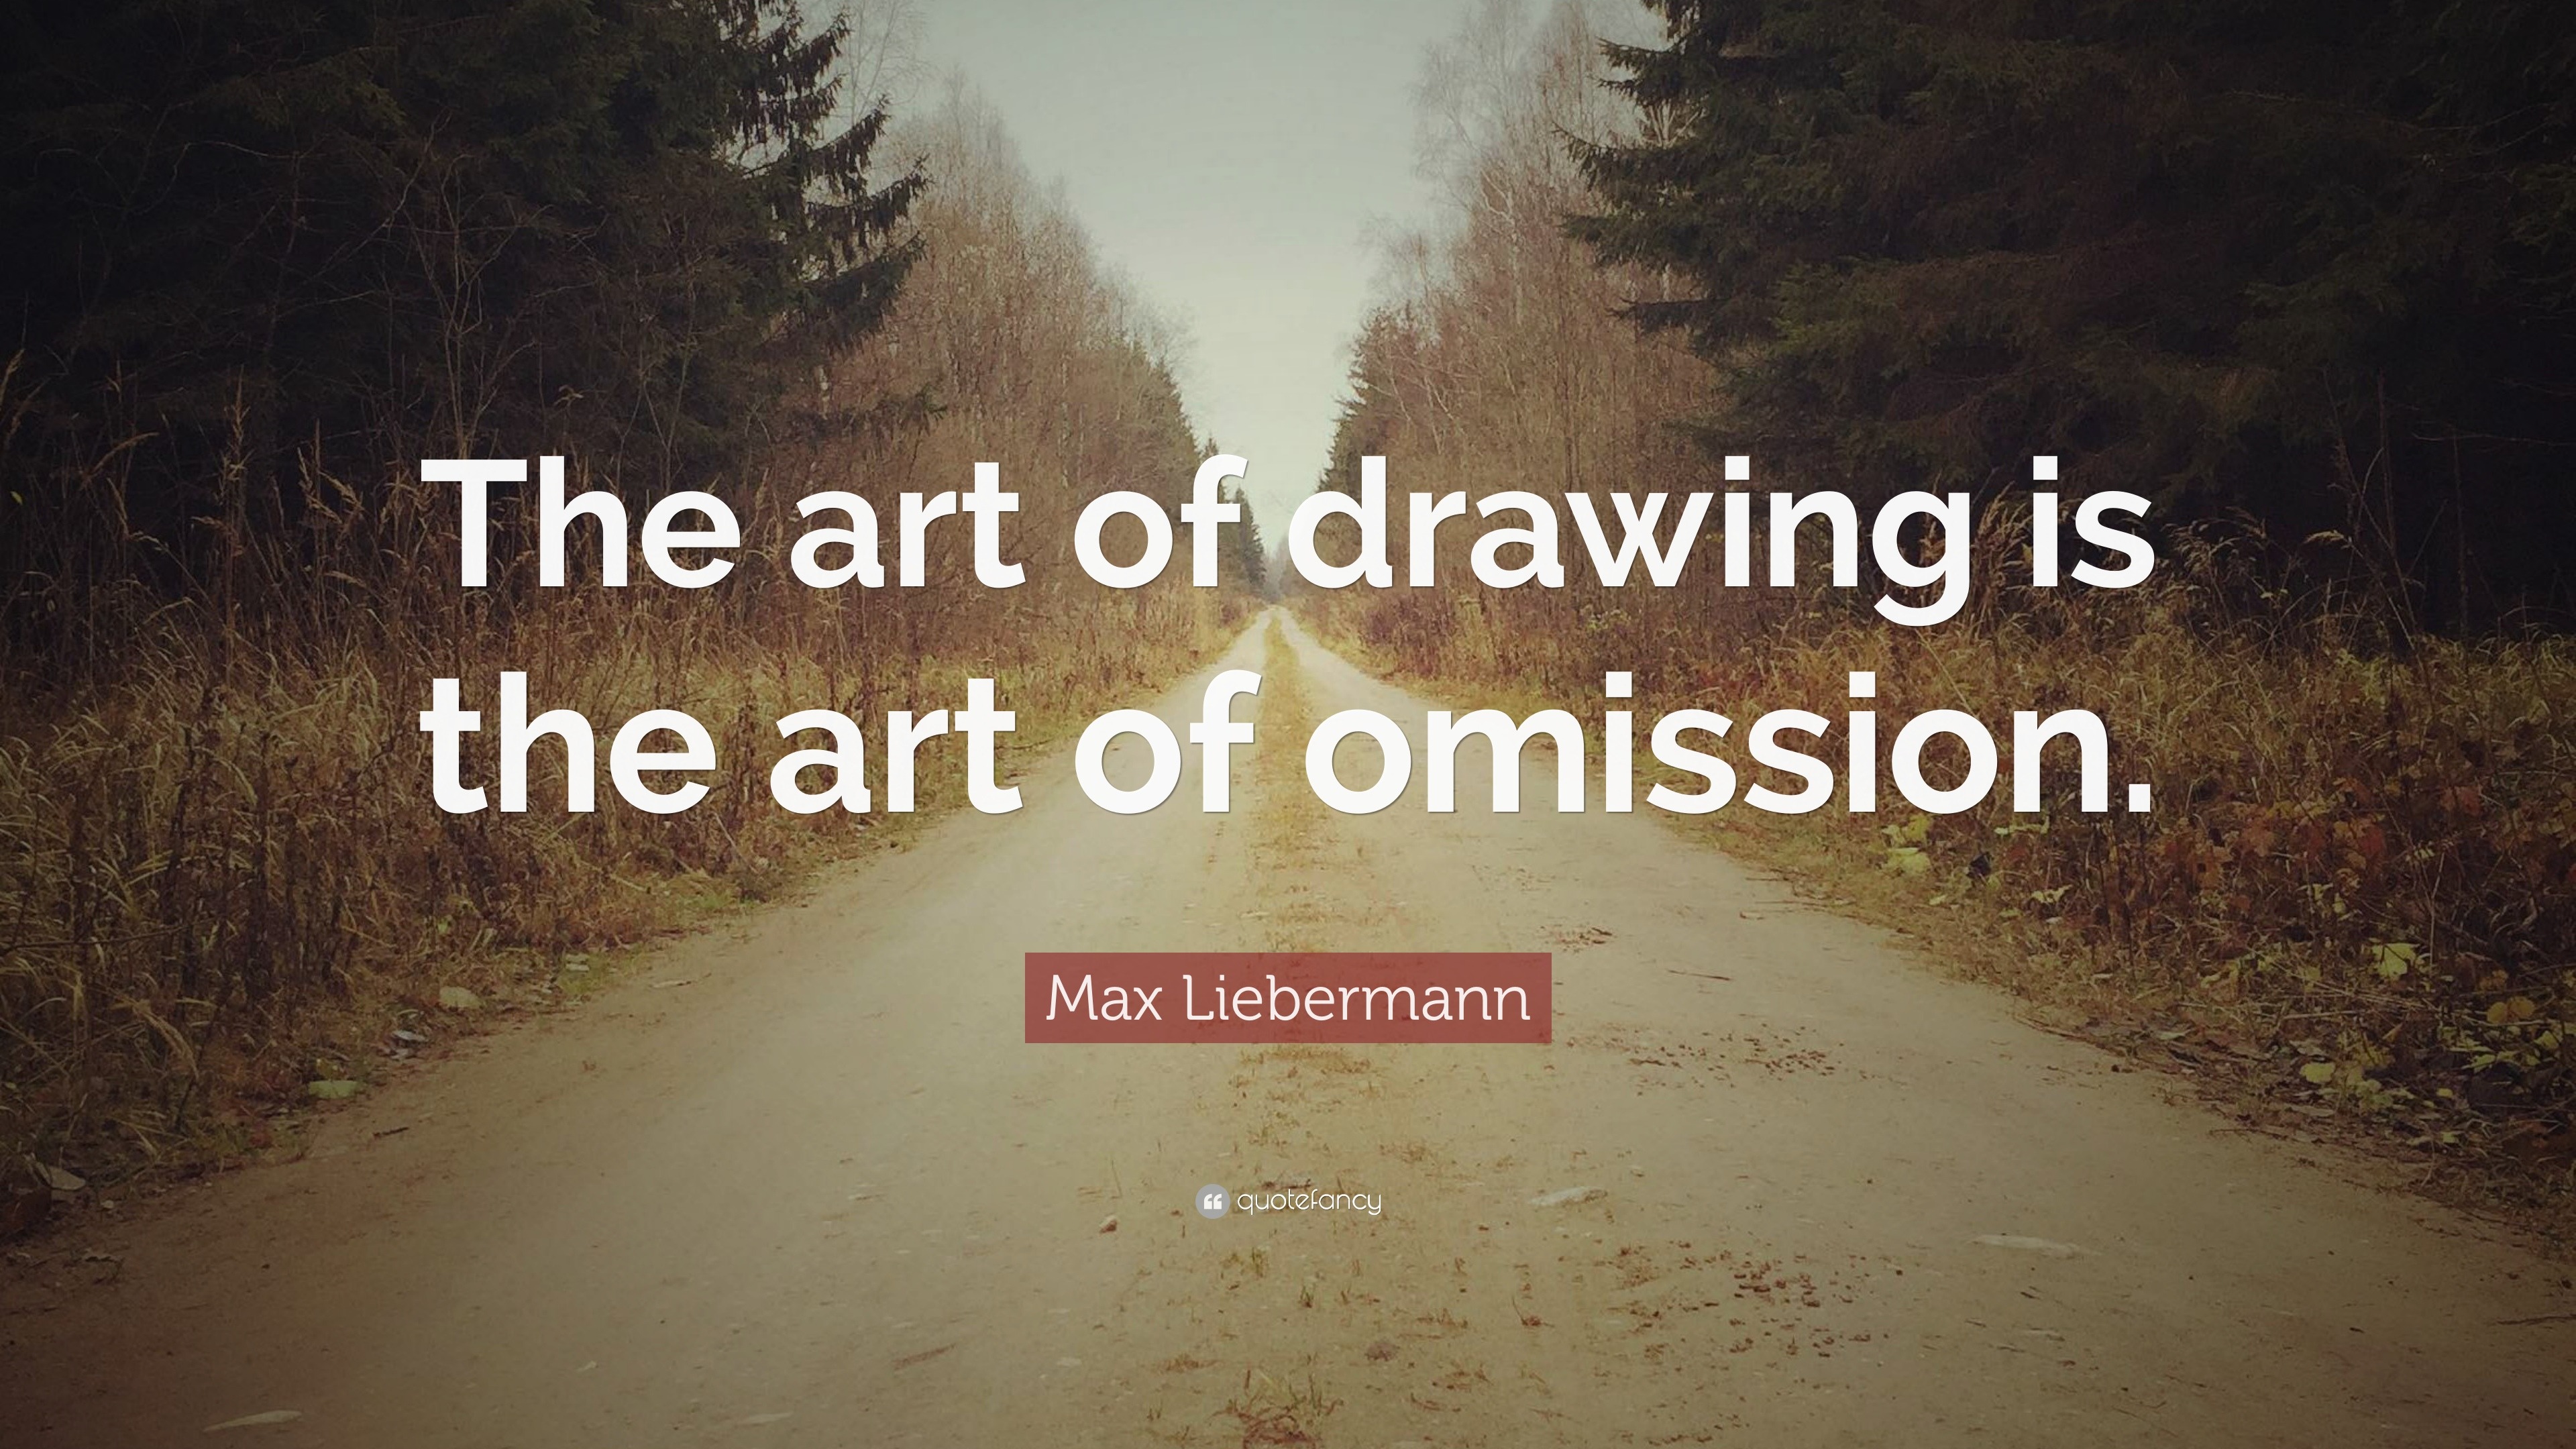 Drawing Quotes: Over 327,202 Royalty-Free Licensable Stock Illustrations &  Drawings | Shutterstock